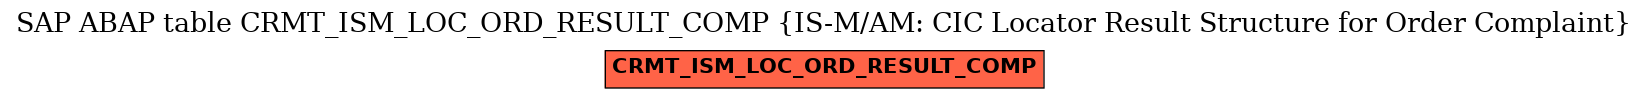 E-R Diagram for table CRMT_ISM_LOC_ORD_RESULT_COMP (IS-M/AM: CIC Locator Result Structure for Order Complaint)